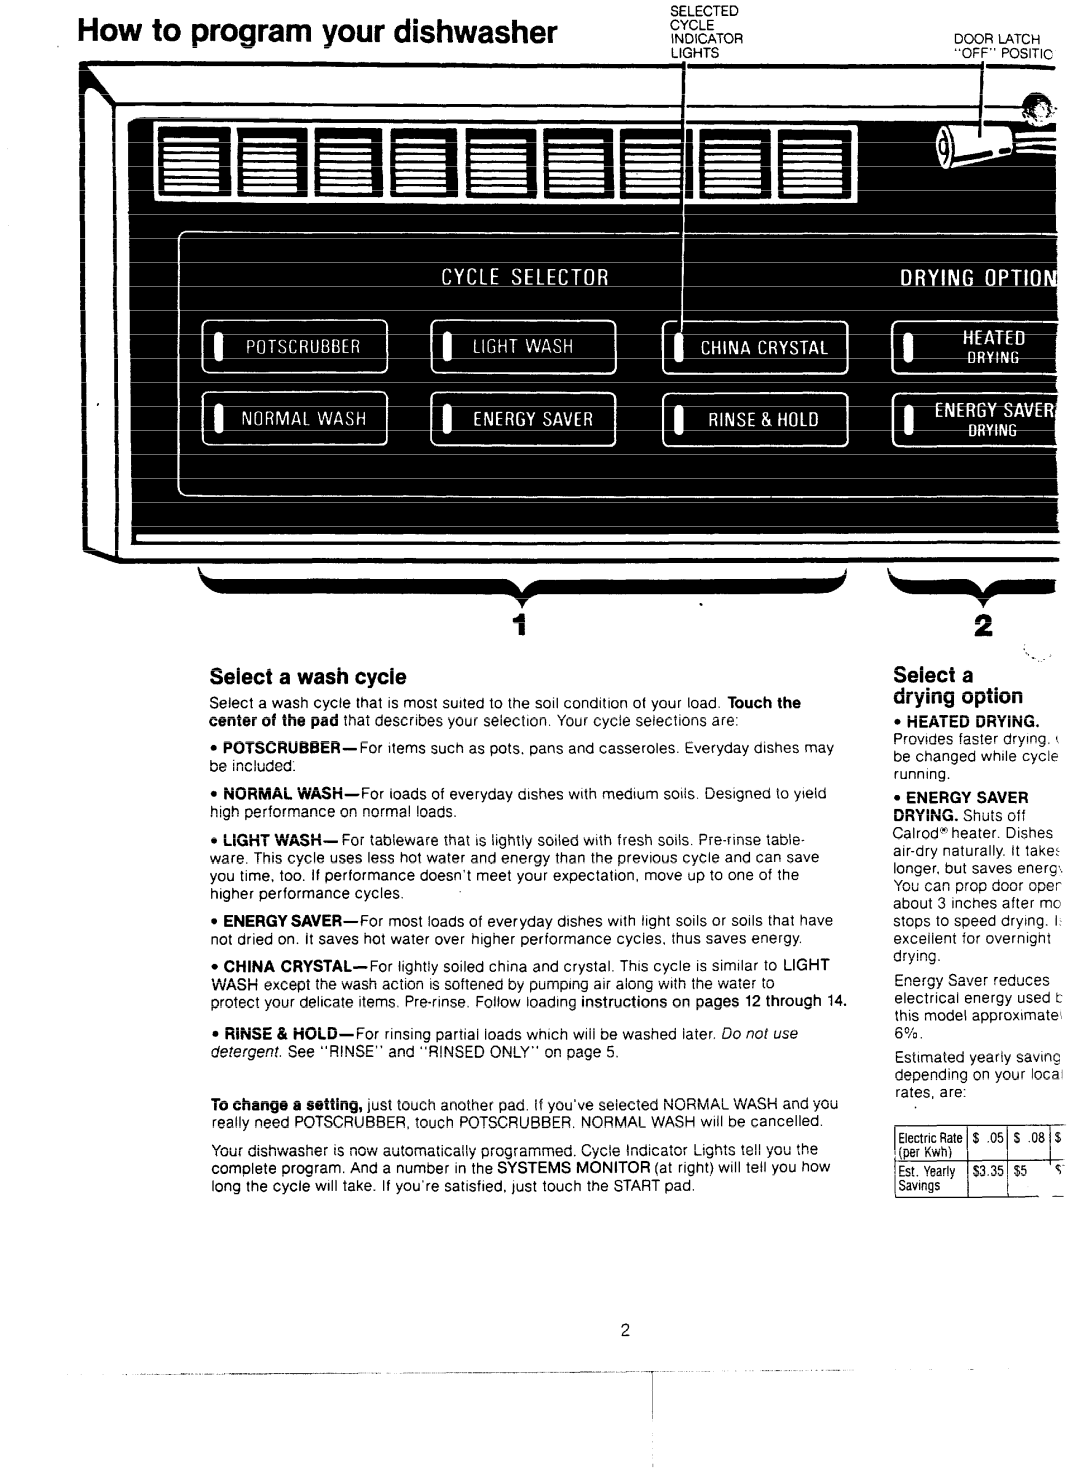 GE GSD2600D manual How to program vour dishwasher, Select a wash cycle, drying option 